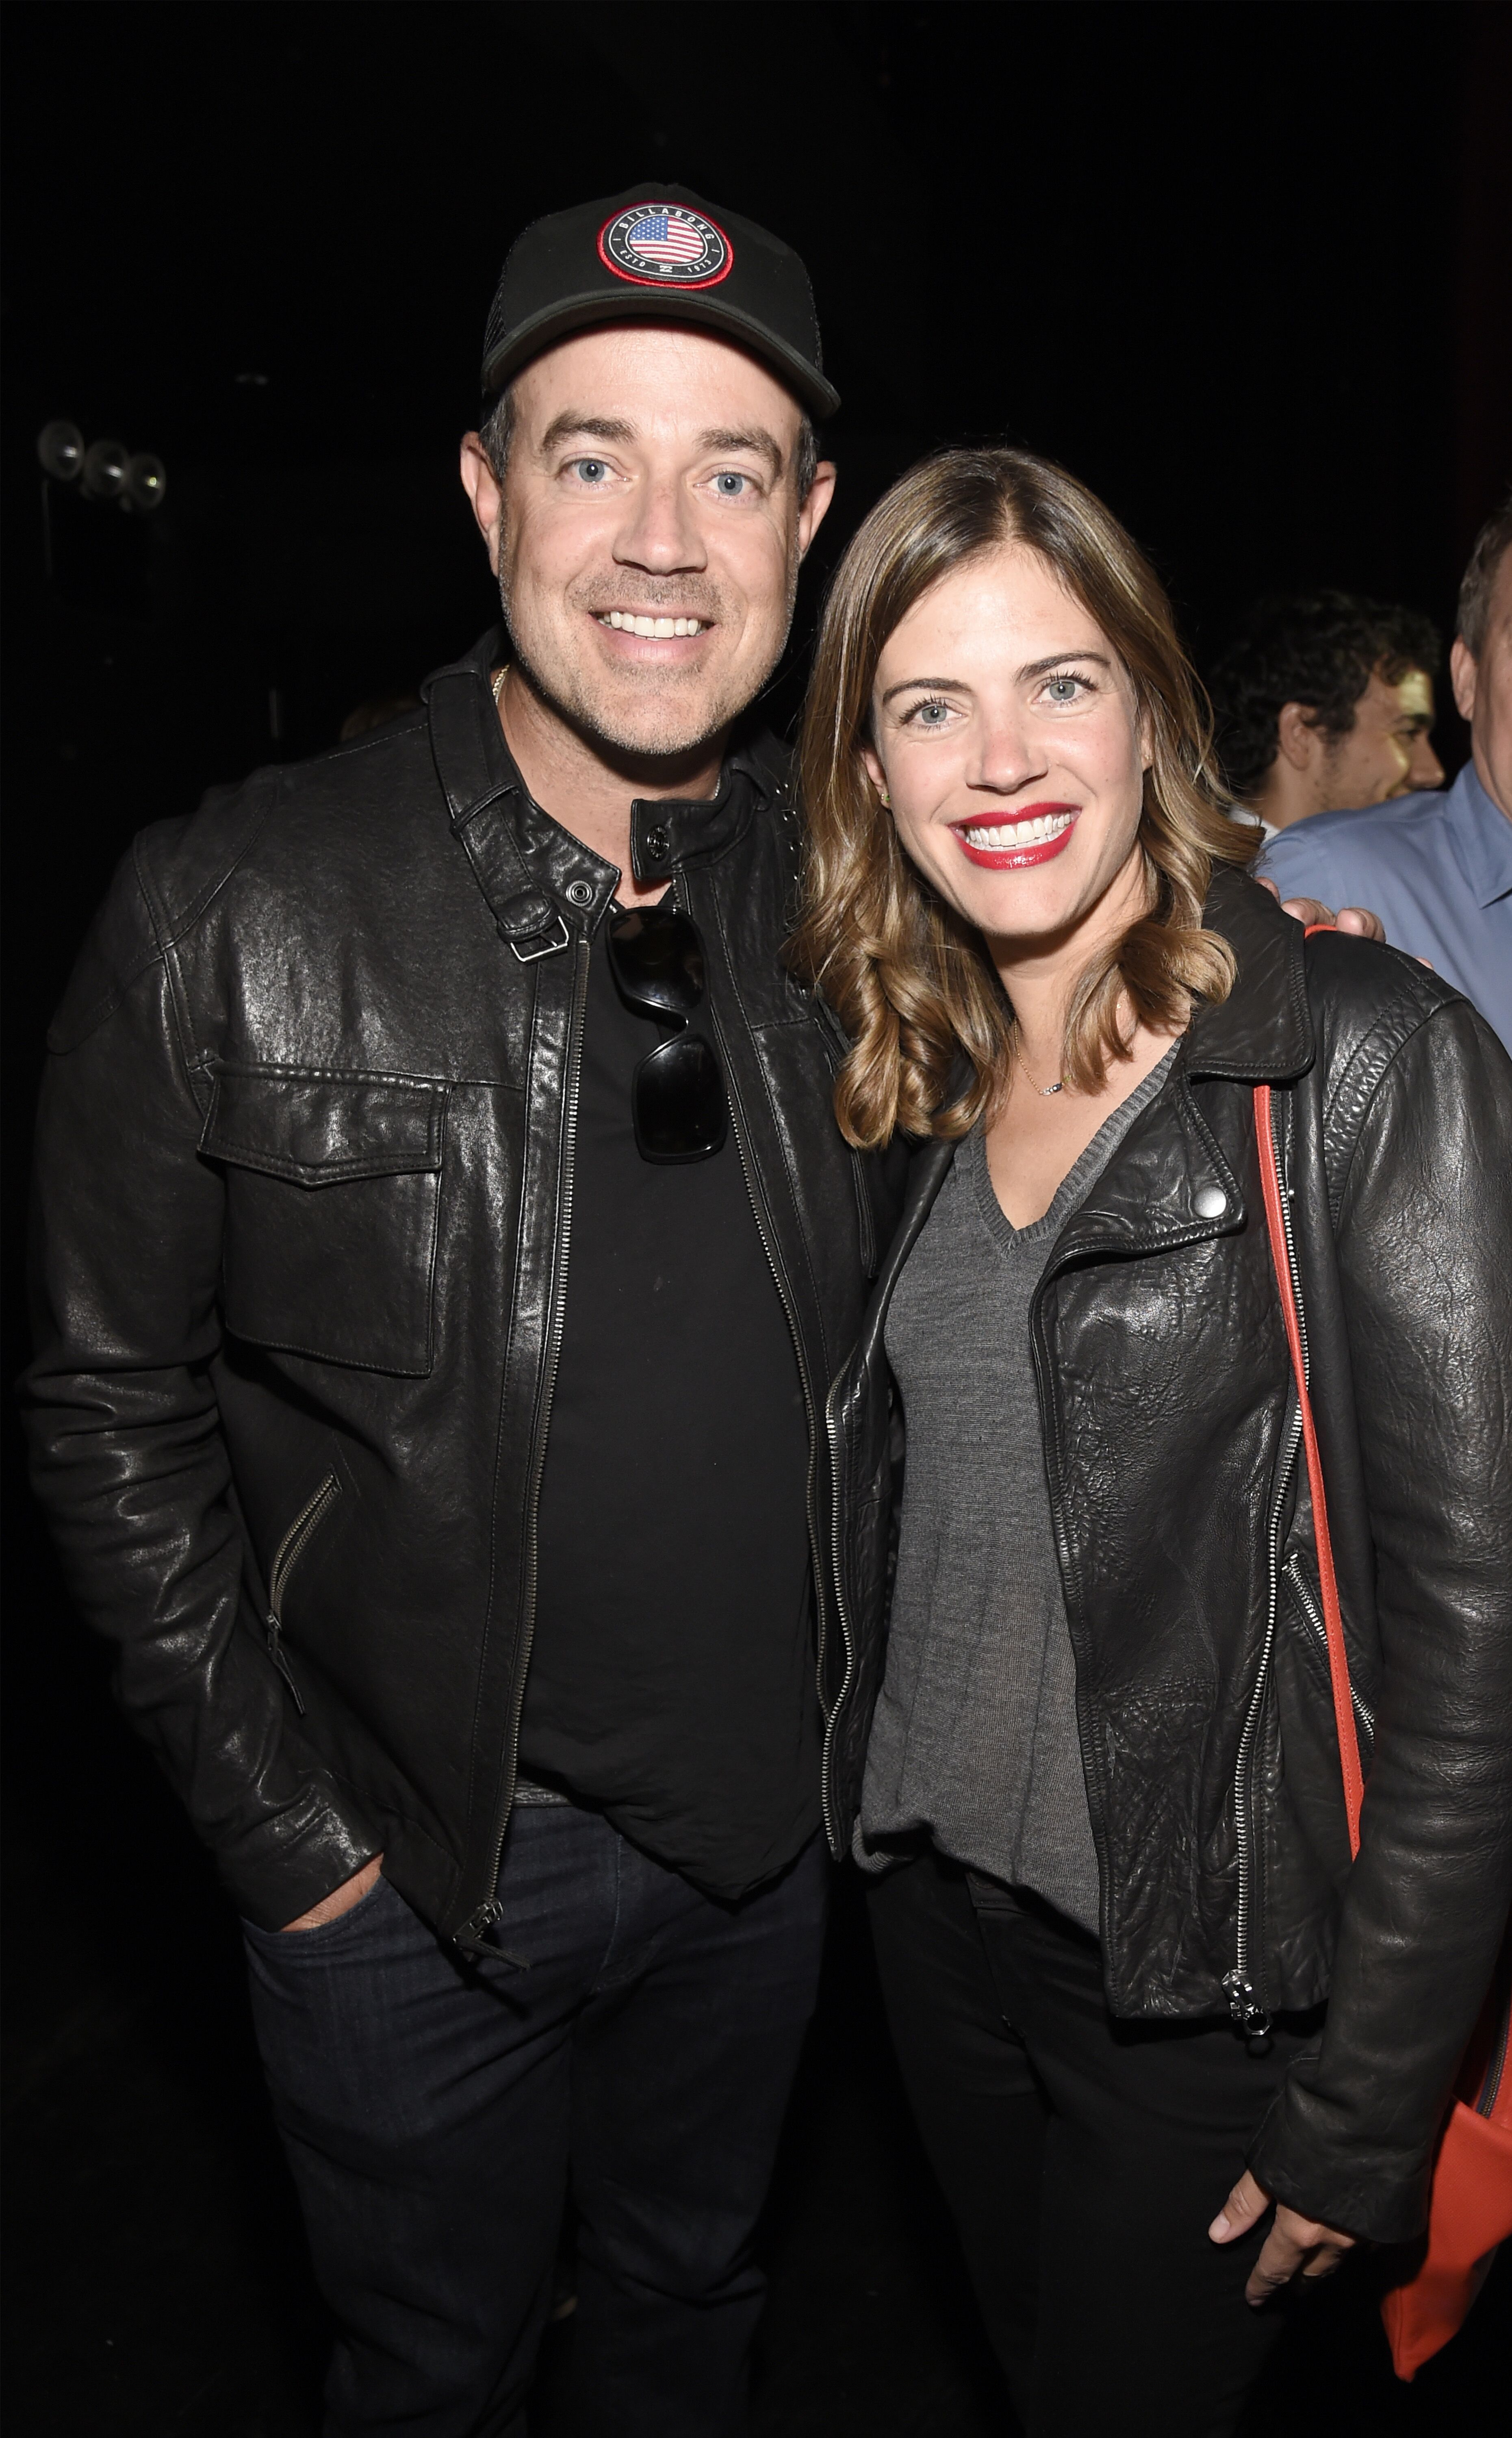  Carson and Siri Daly at SiriusXM's private concert with U2 in 2018 | Source: Getty Images